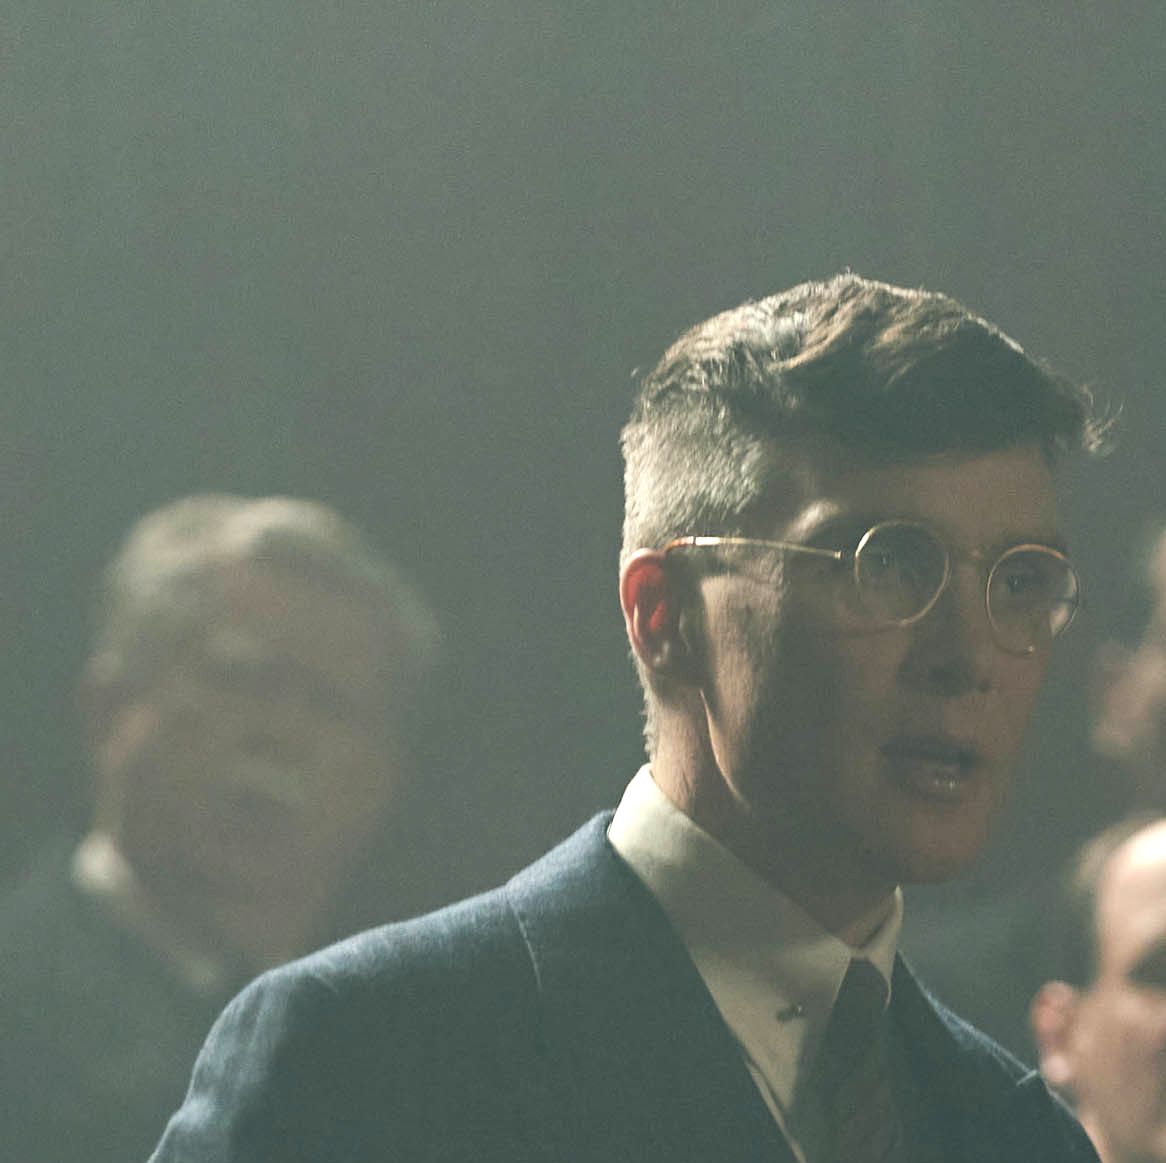 Peaky Blinders: 8 Things You Didn't Know About The Series